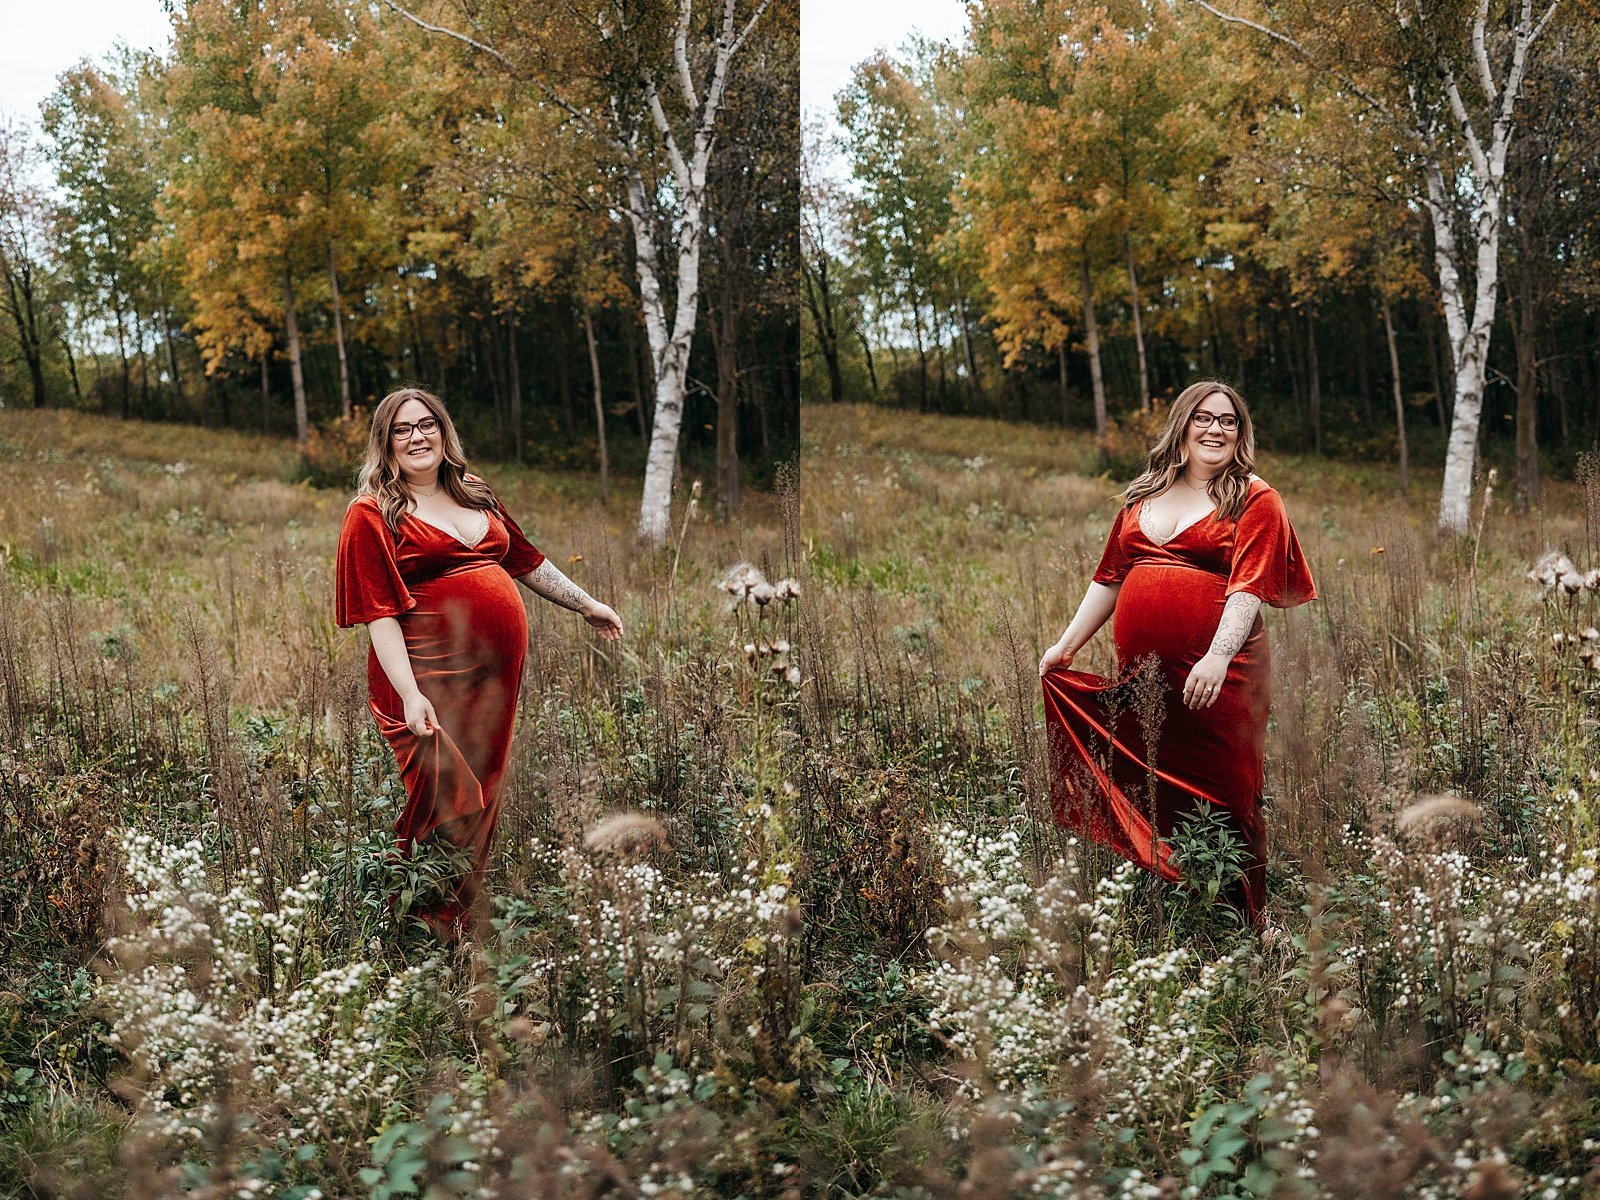  Pregnant mother dancing in a field in a red velvet dress in Minnesota.  